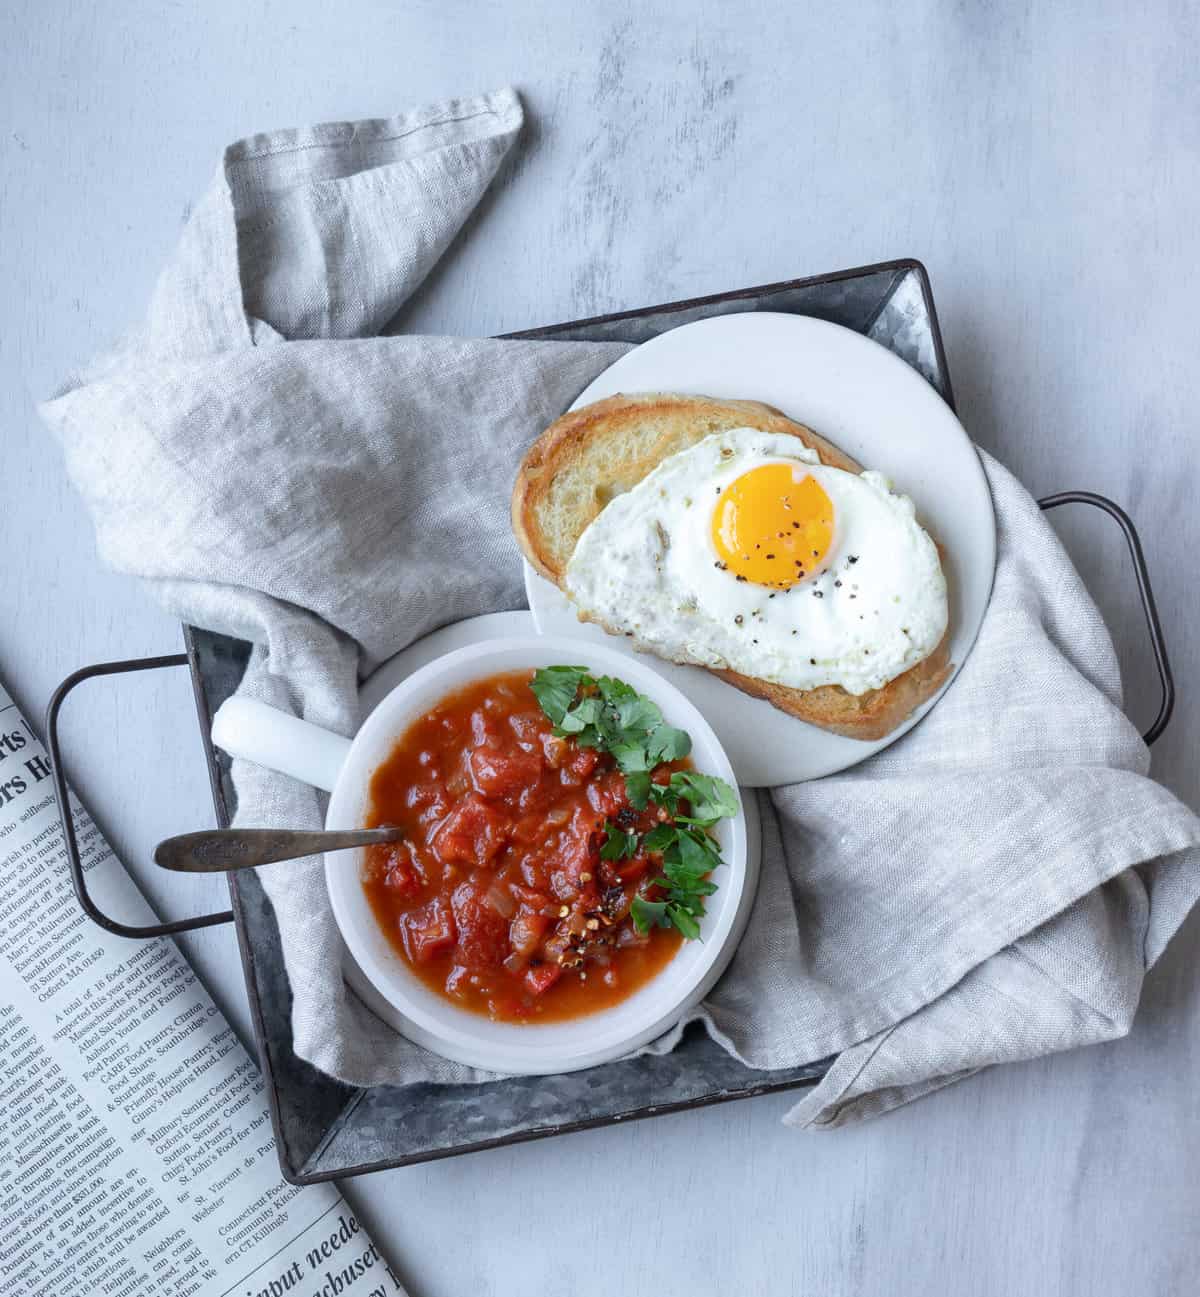 Bowl of tomato soup with fried egg on toast.